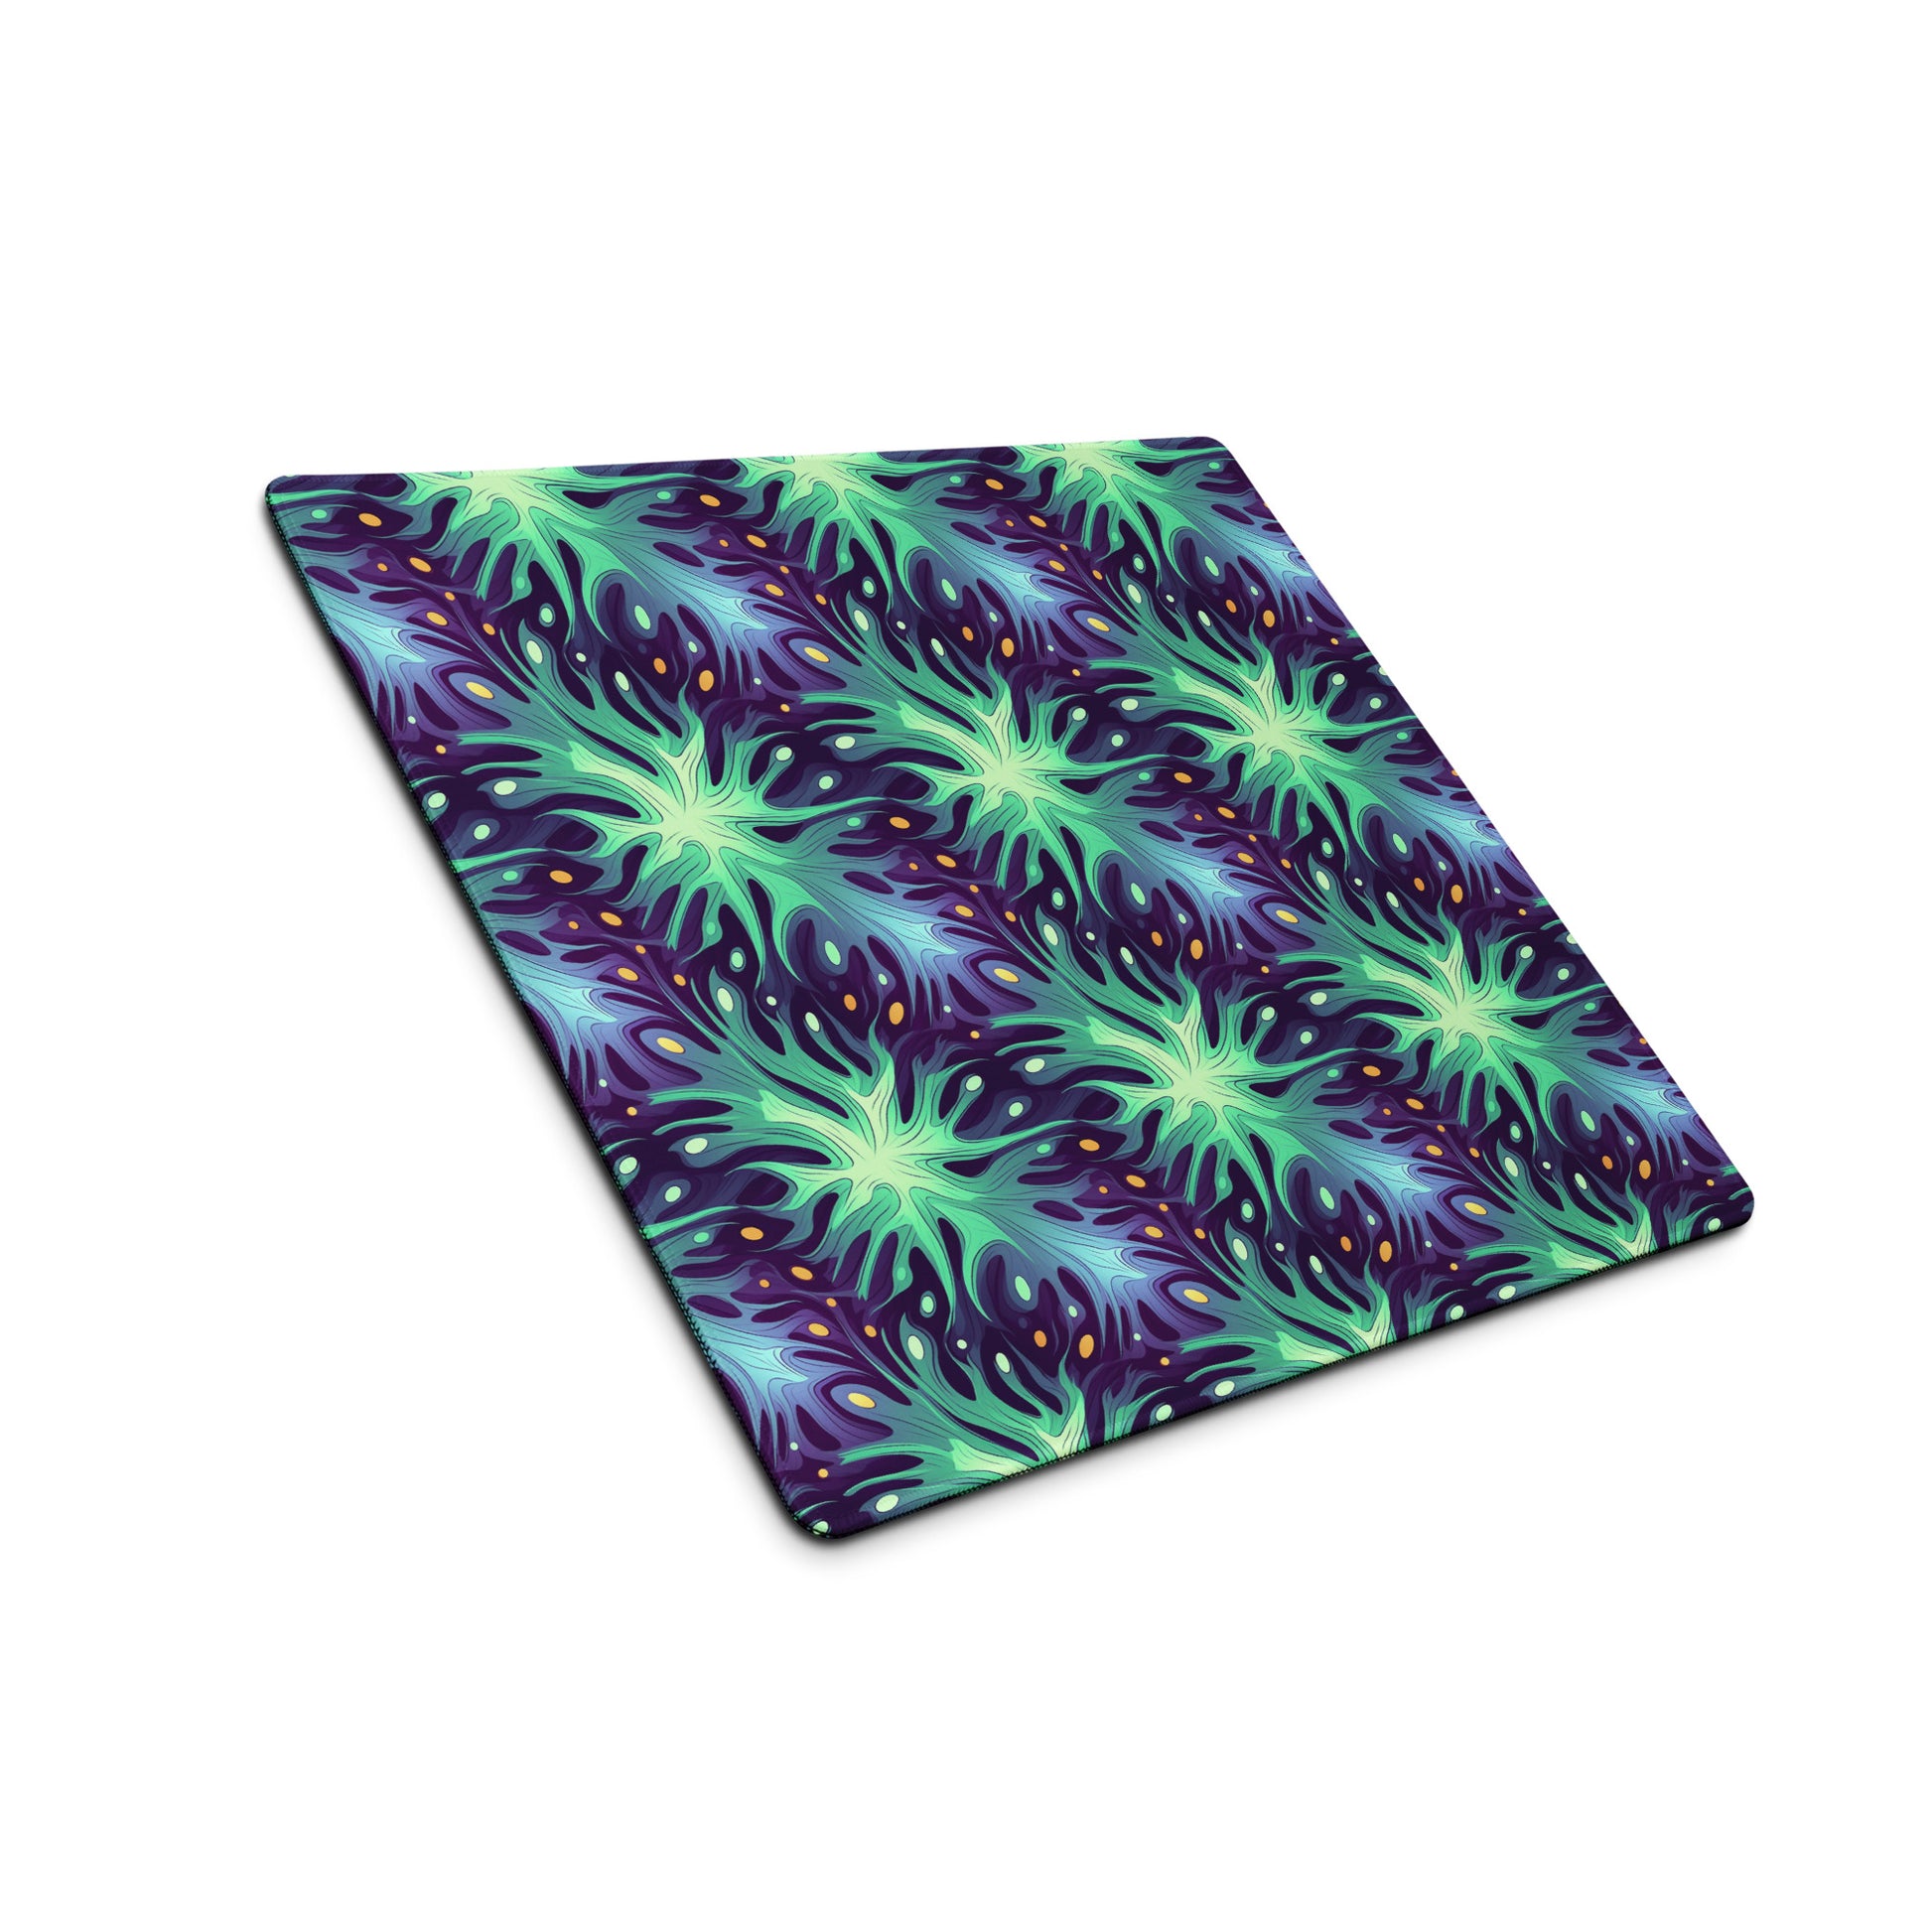 A 36" x 18" desk pad with a green and blue abstract pattern sitting at an angle.